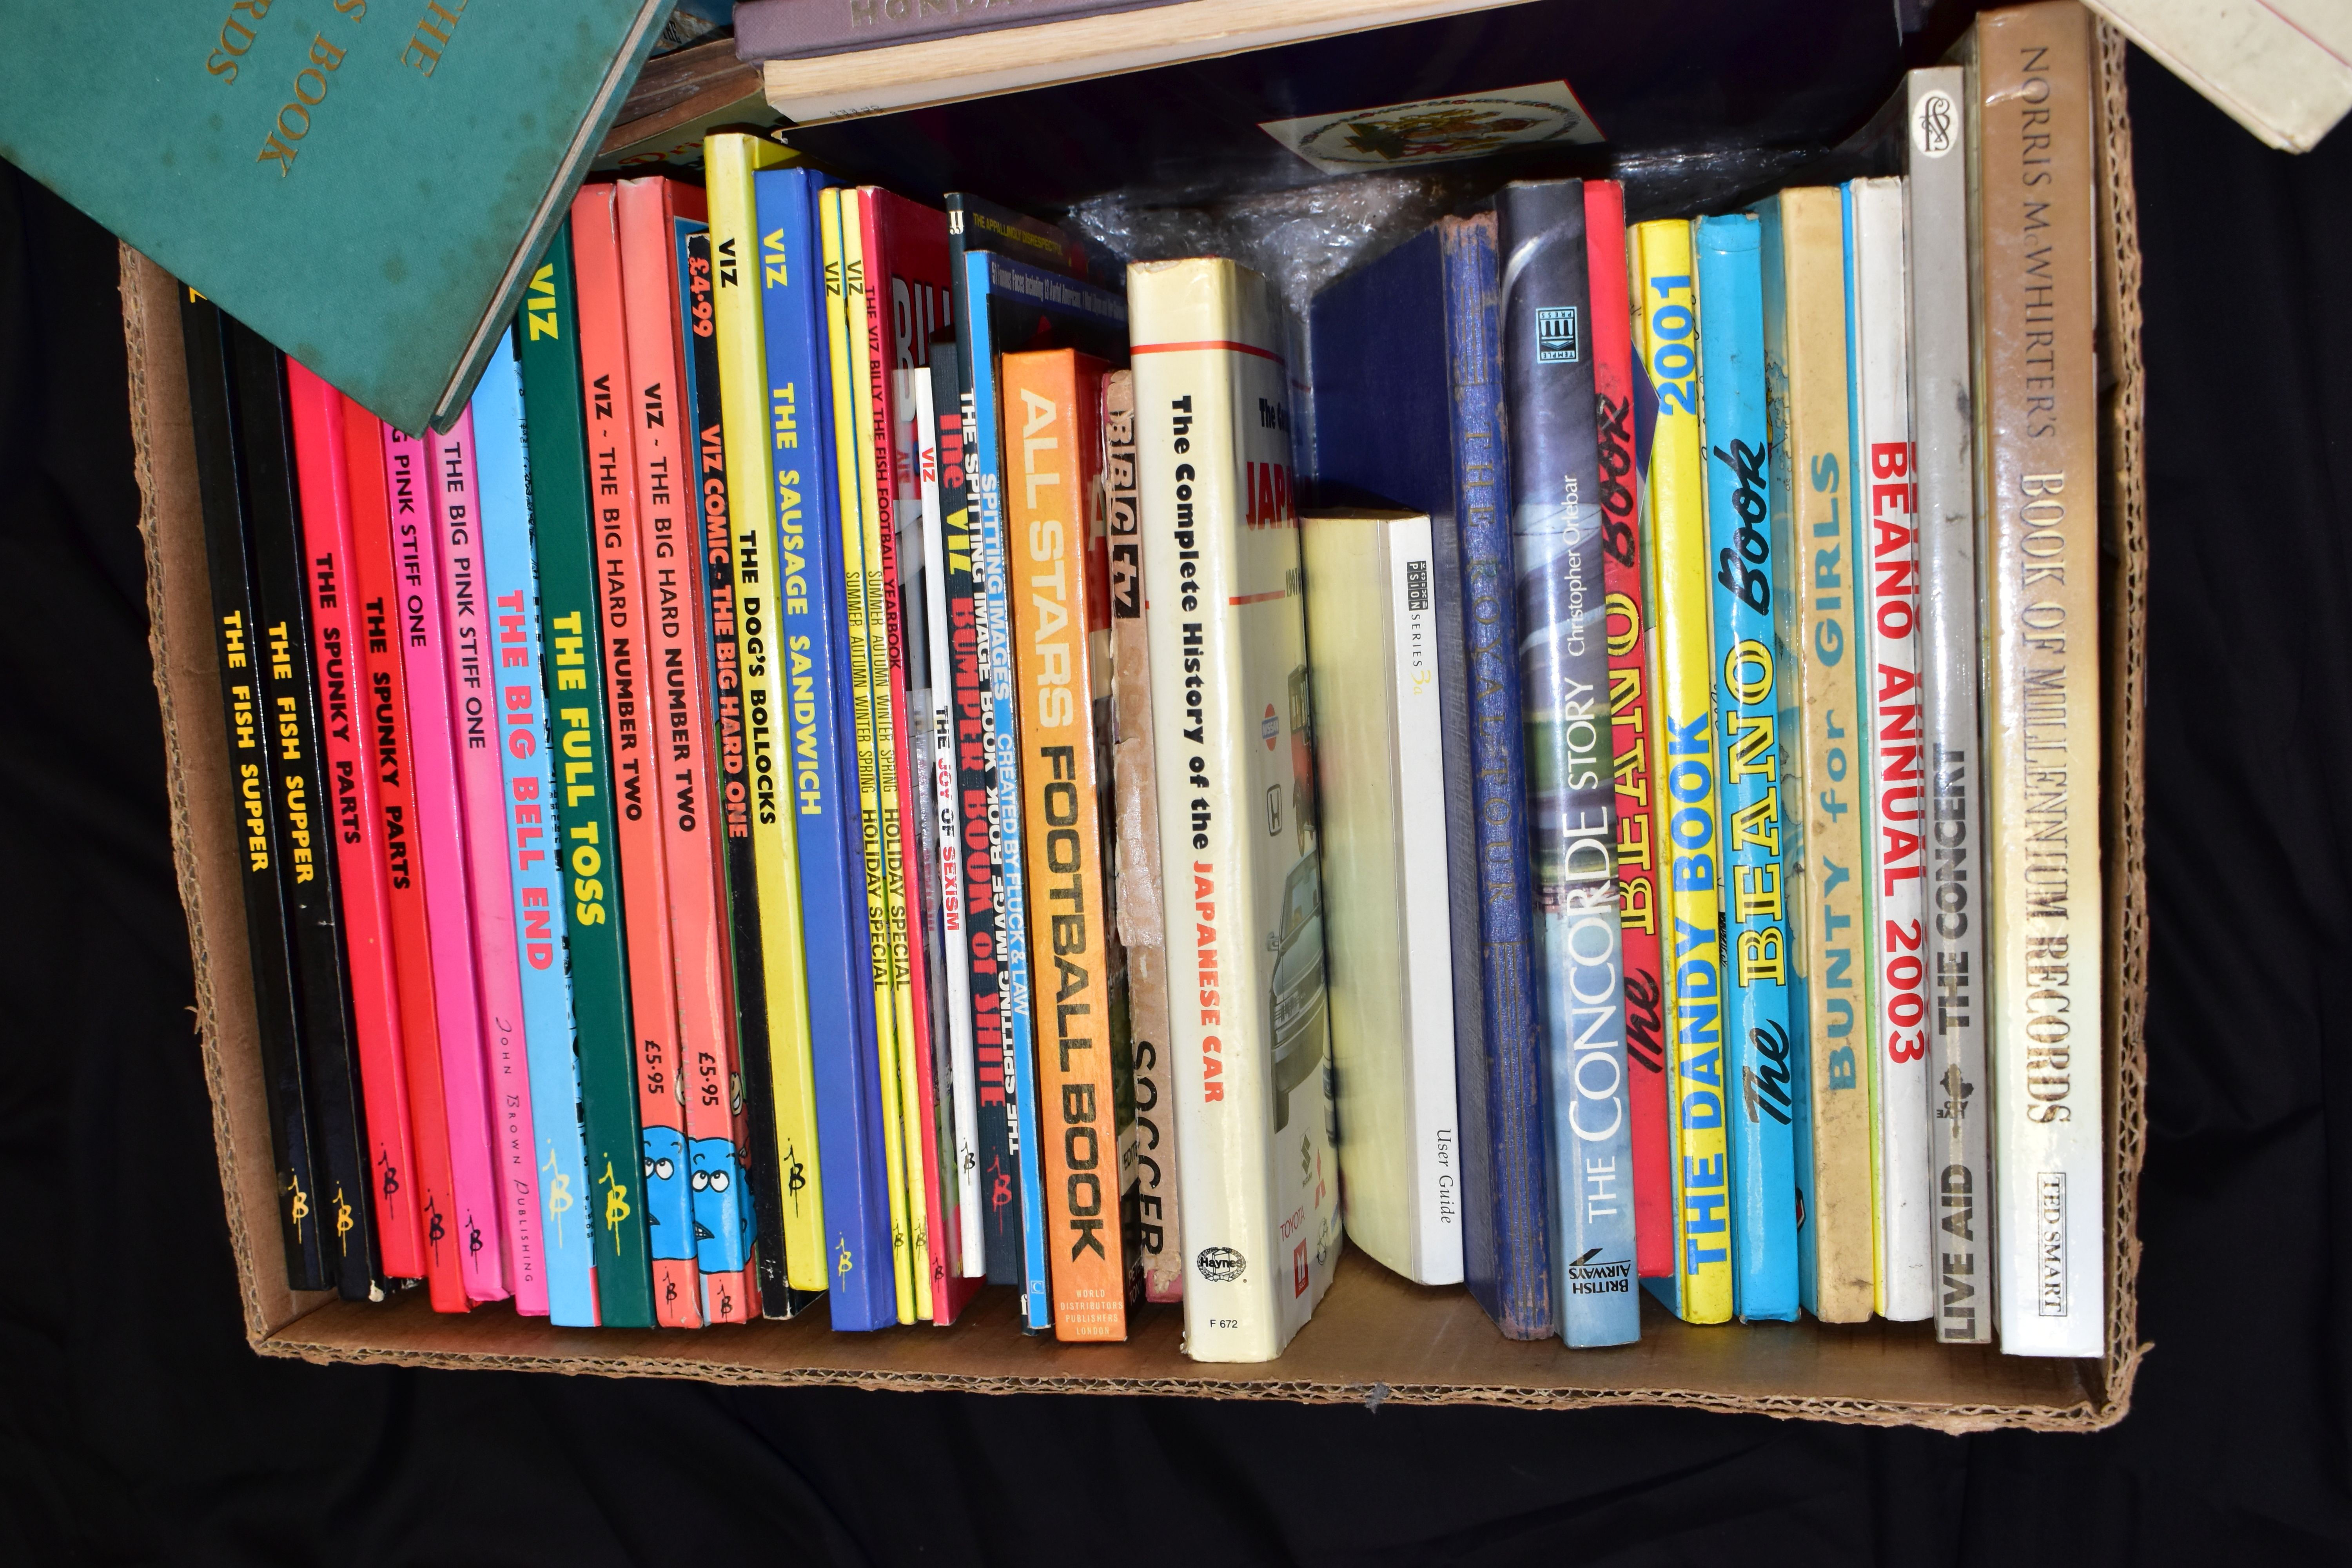 BOOKS & COMICS, approximately forty book titles to include VIZ, Beano, Dandy, Bunty, Annual, - Image 3 of 4